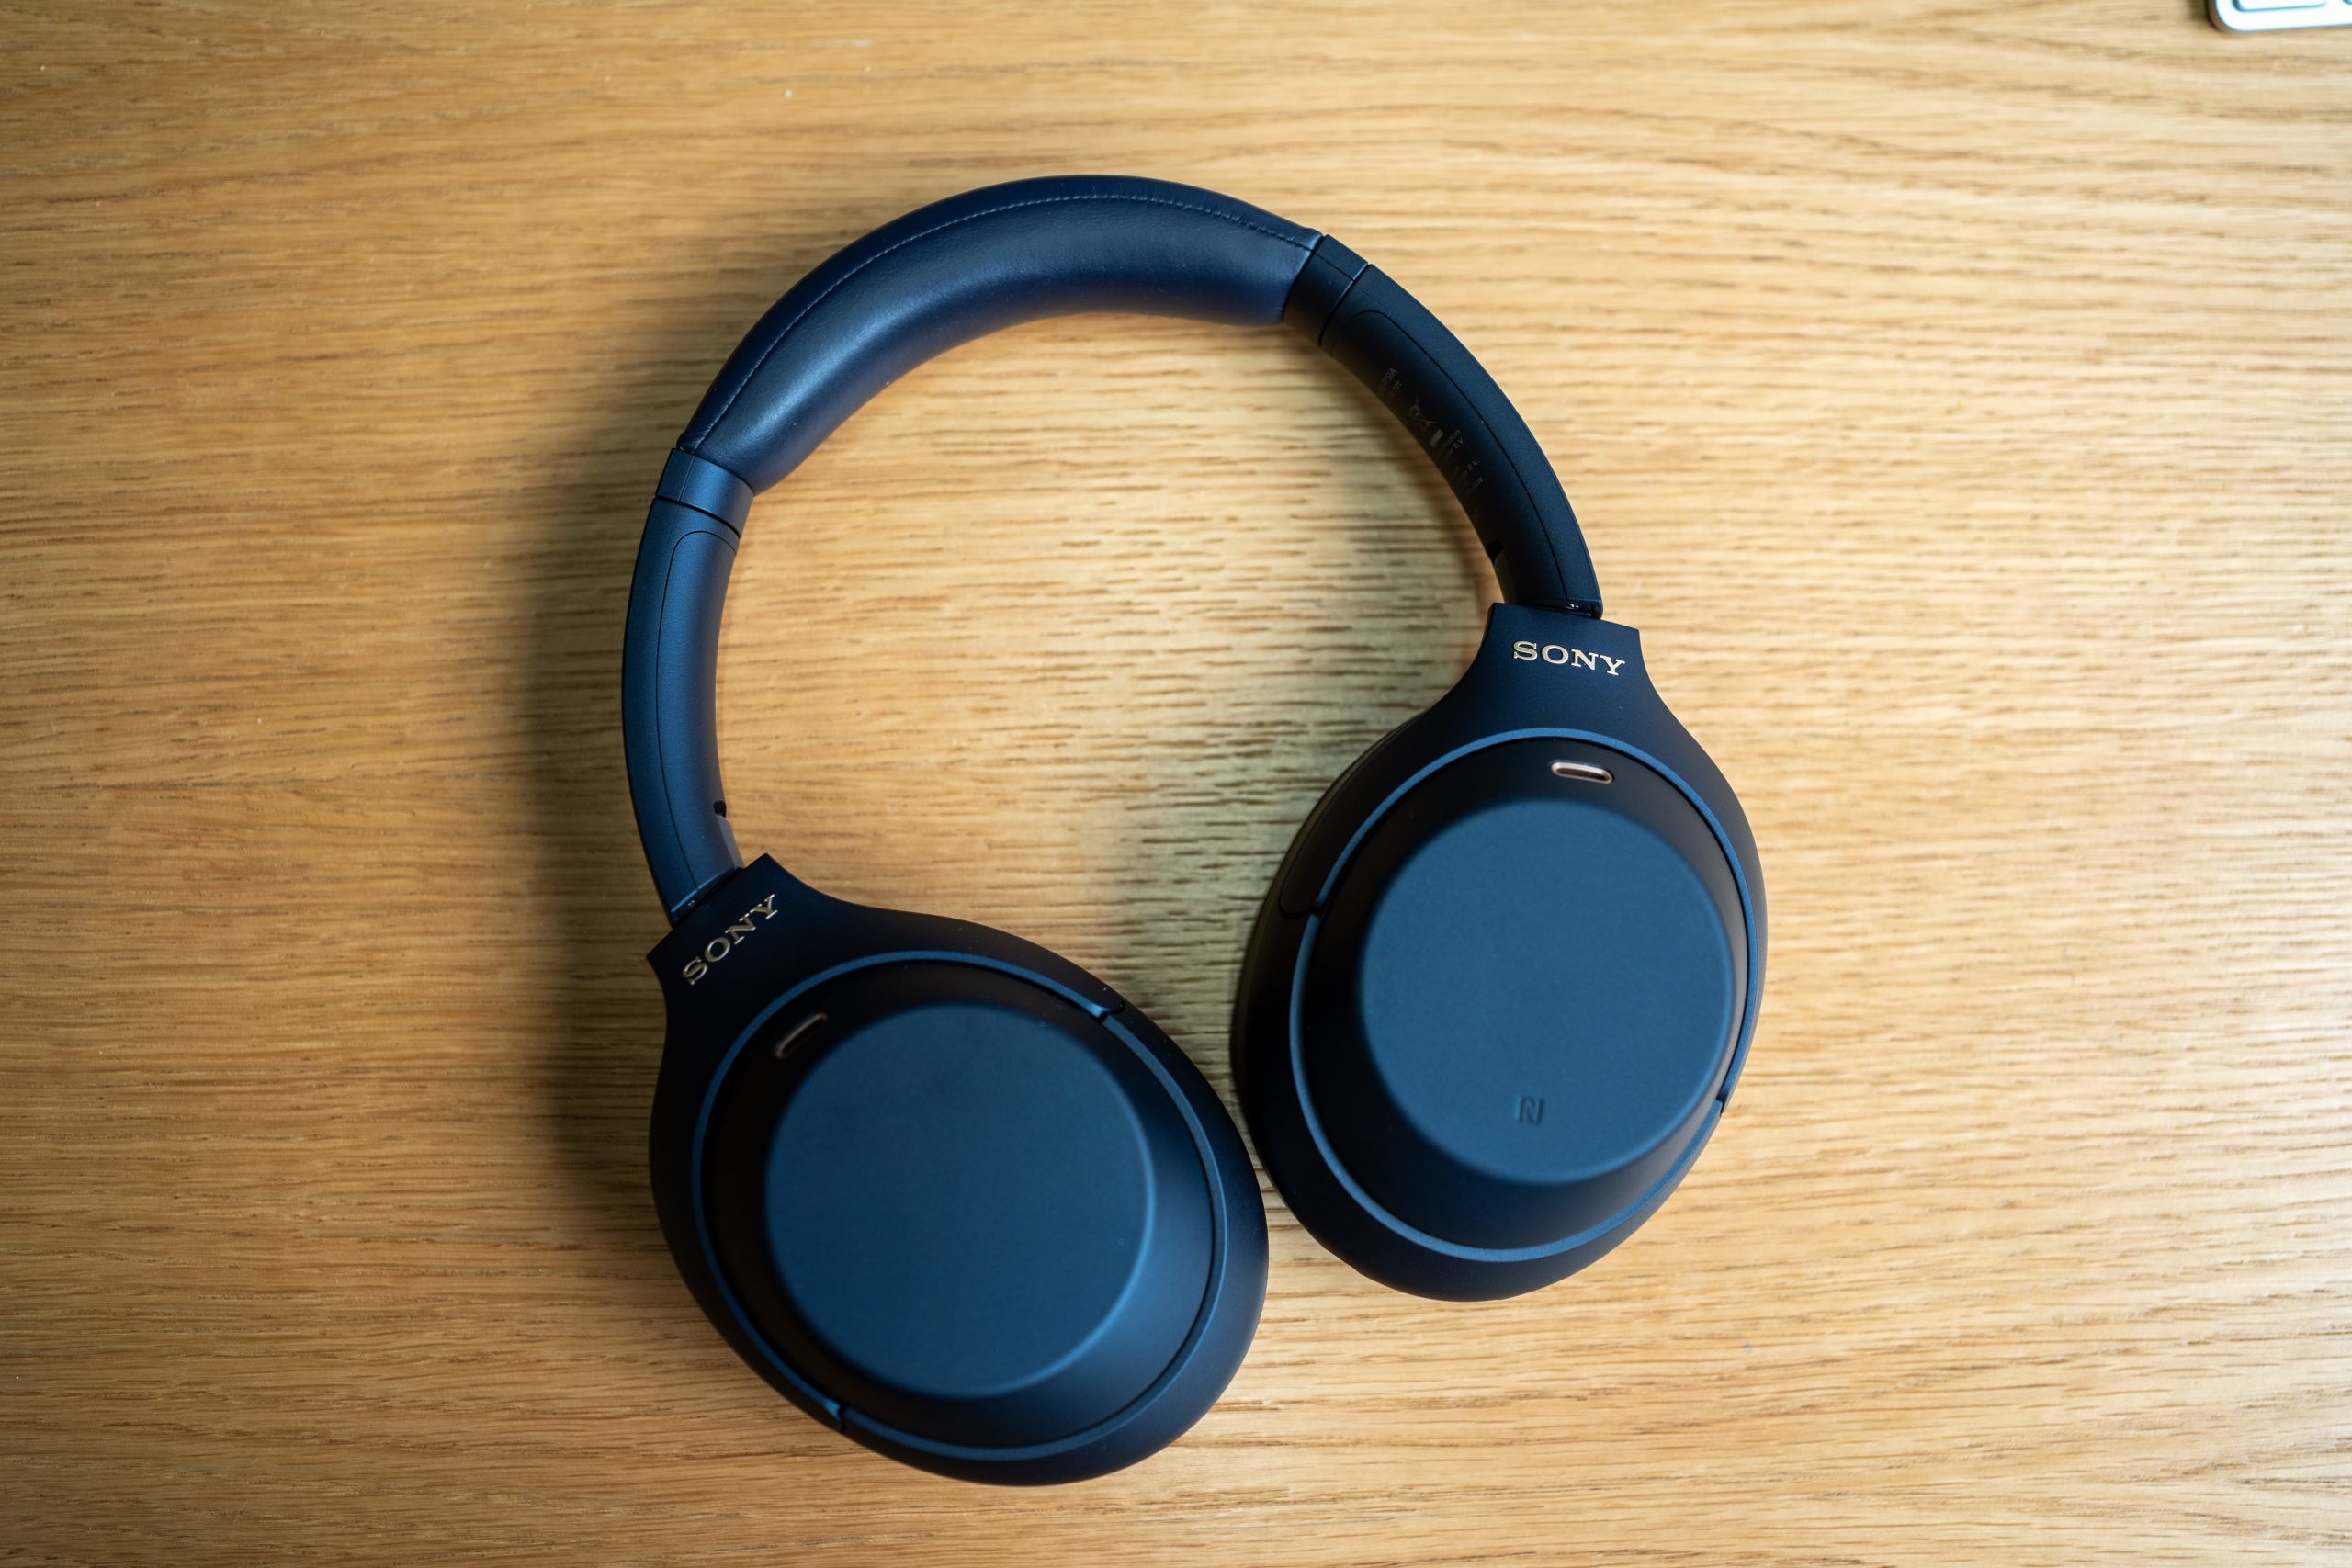 Sony WH-1000XM4 Noise cancelling Headphones for a travel blog review